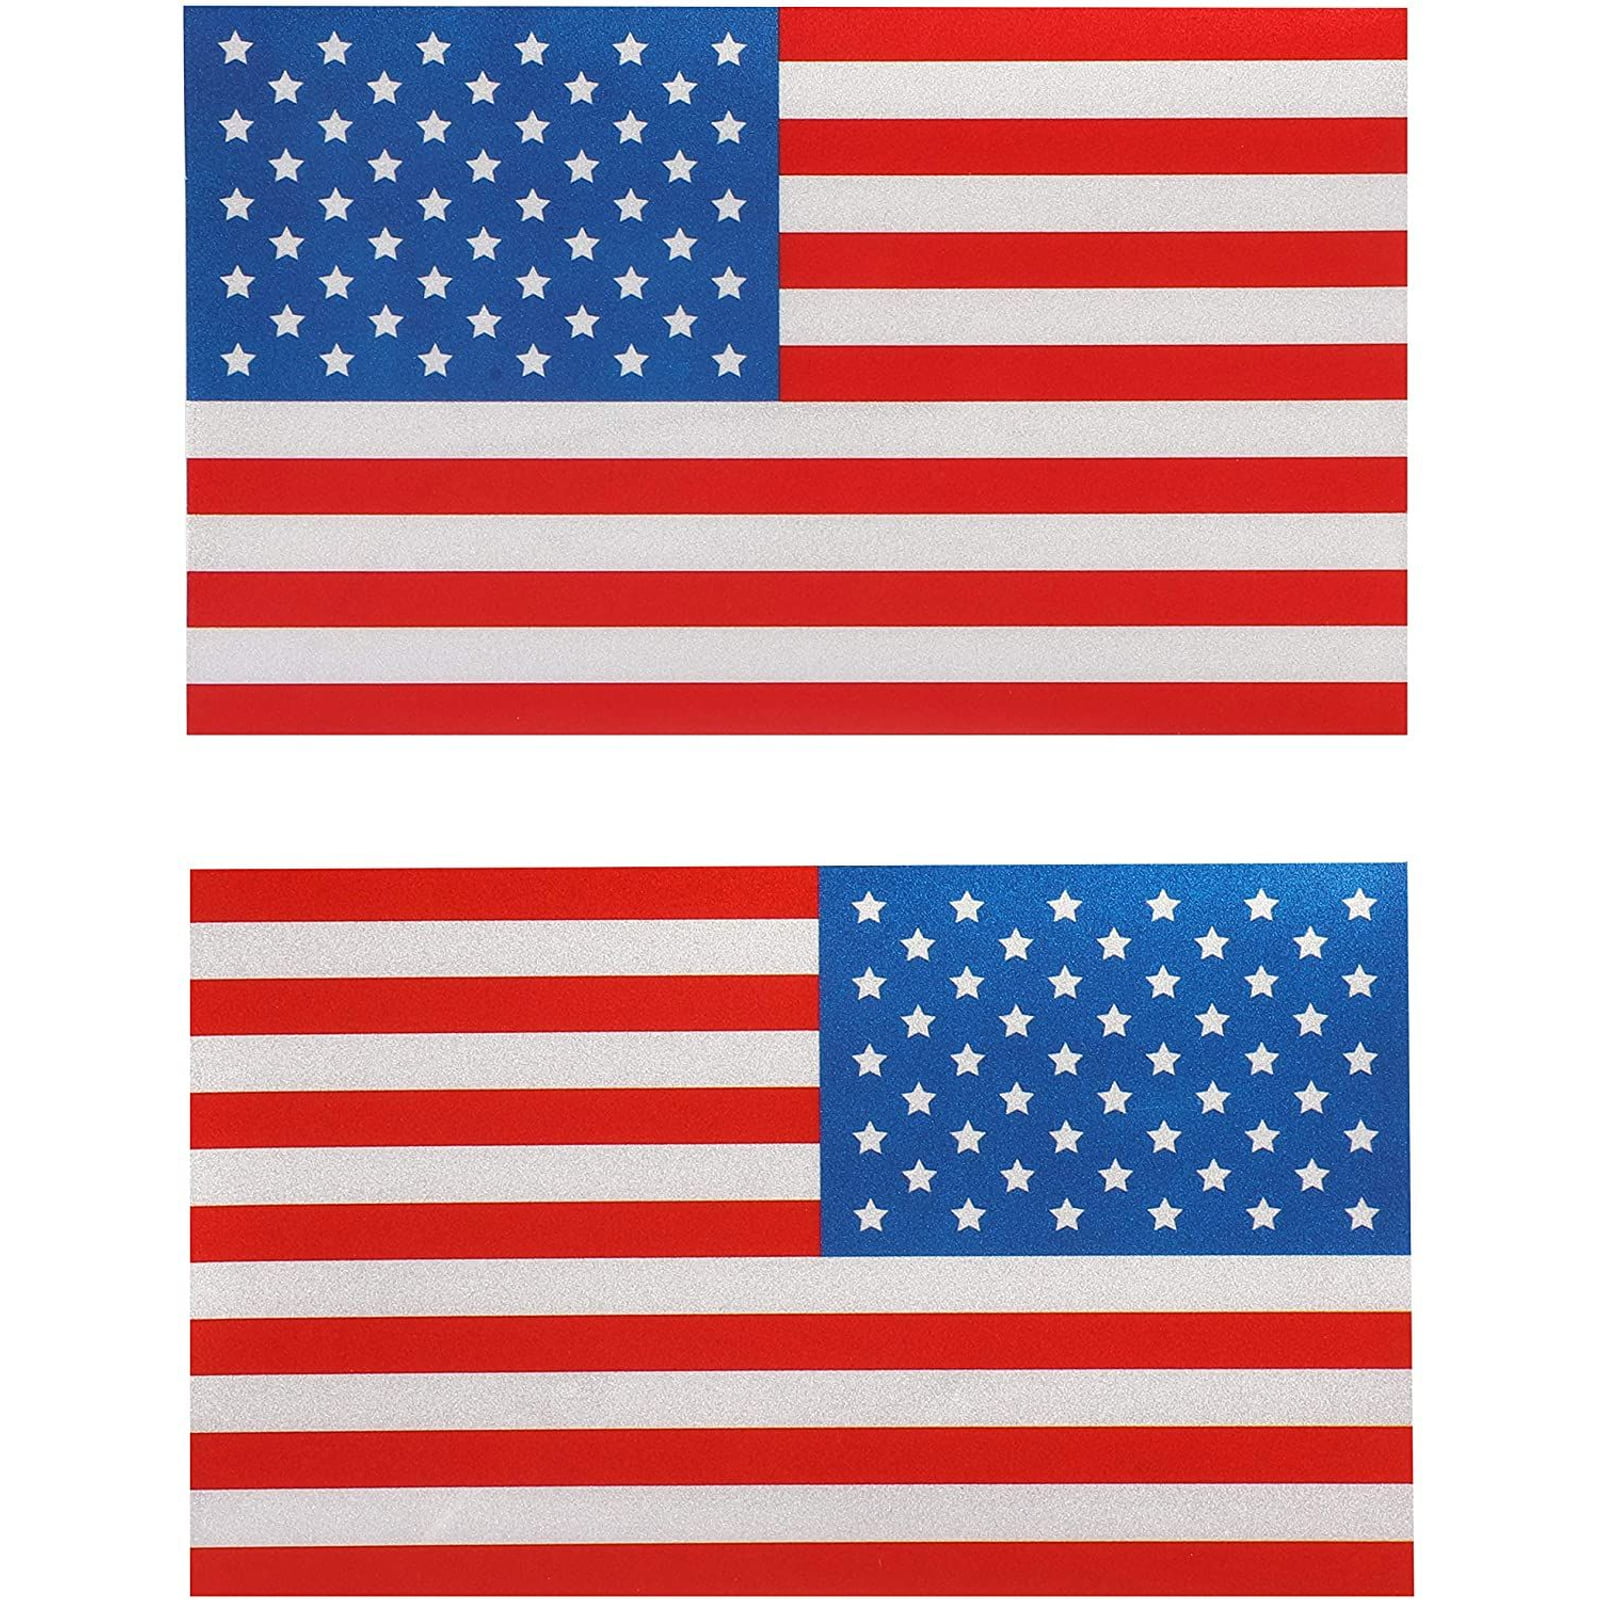 COMBO 4 AMERICAN FLAG STICKERS 1" X 2" SMALL HOBBY STICKERS 